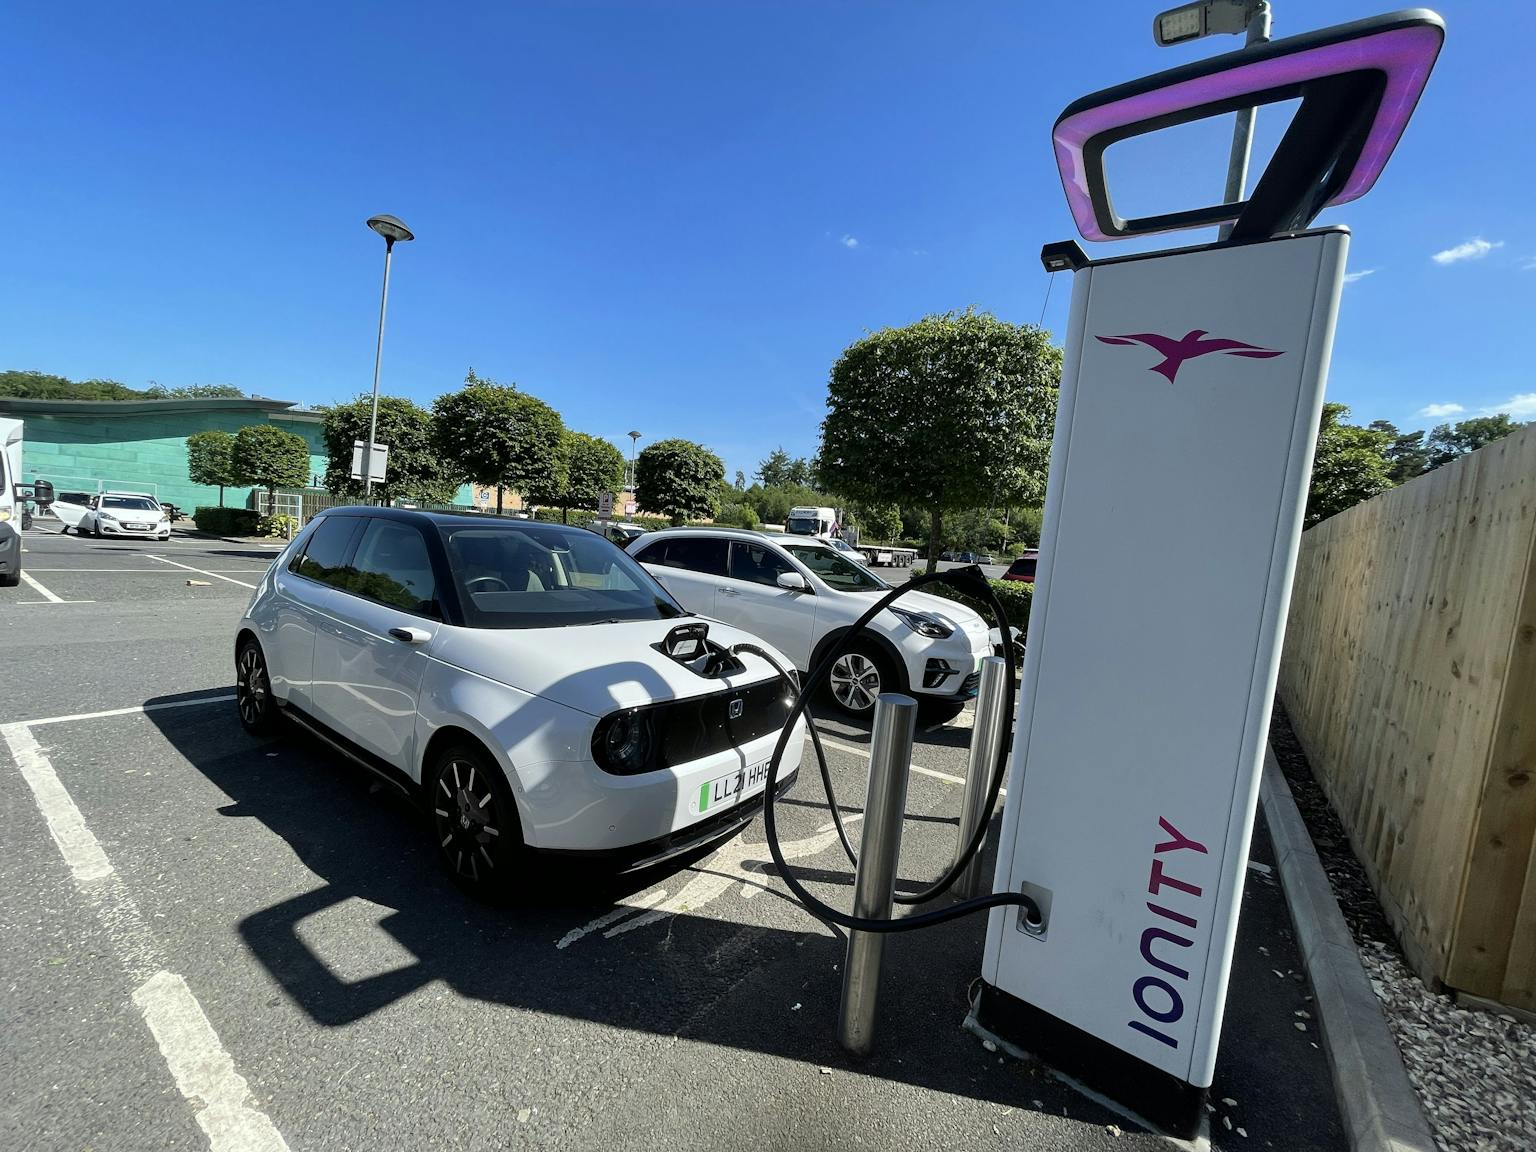 photo shows electric car charging at an Ionity charging location